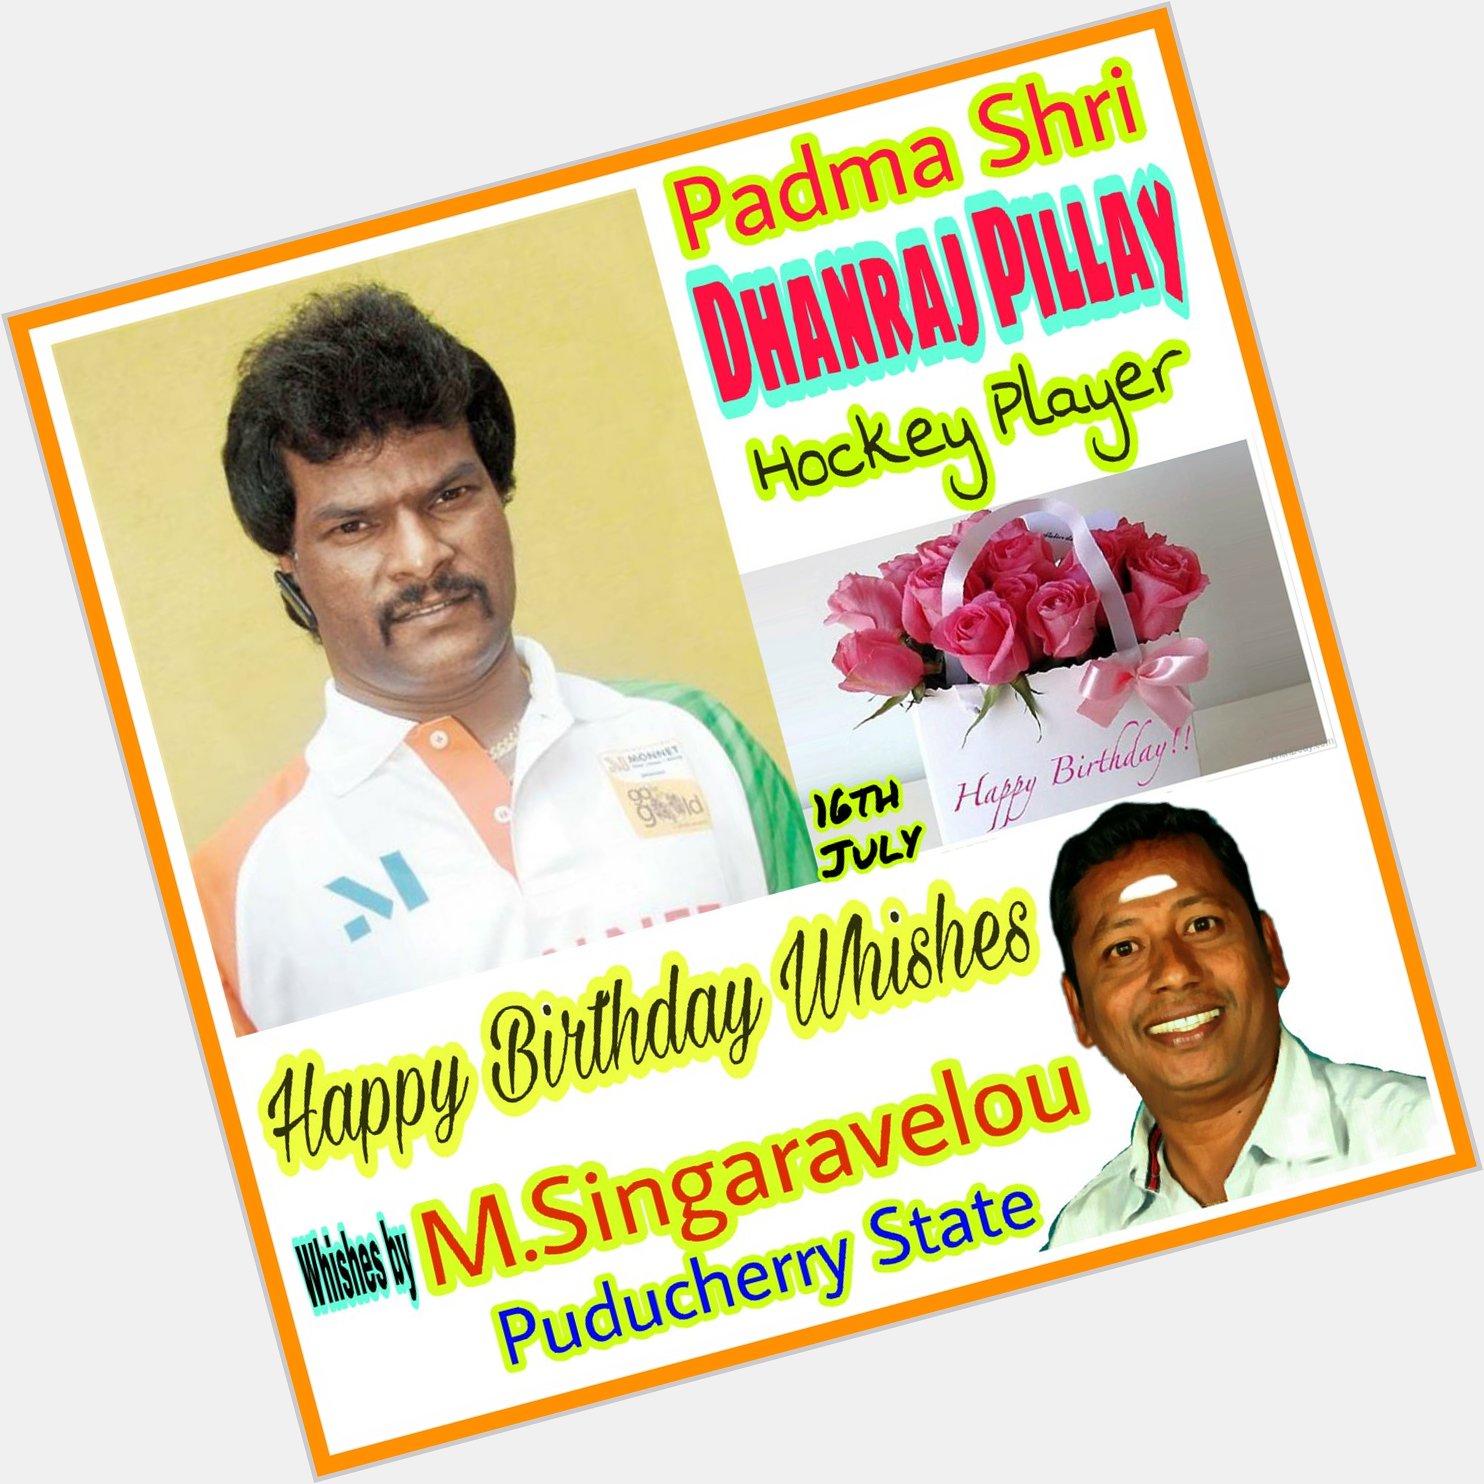  Many more Happy returns of the day Wish you a HAPPY BIRTHDAY WHISHES 